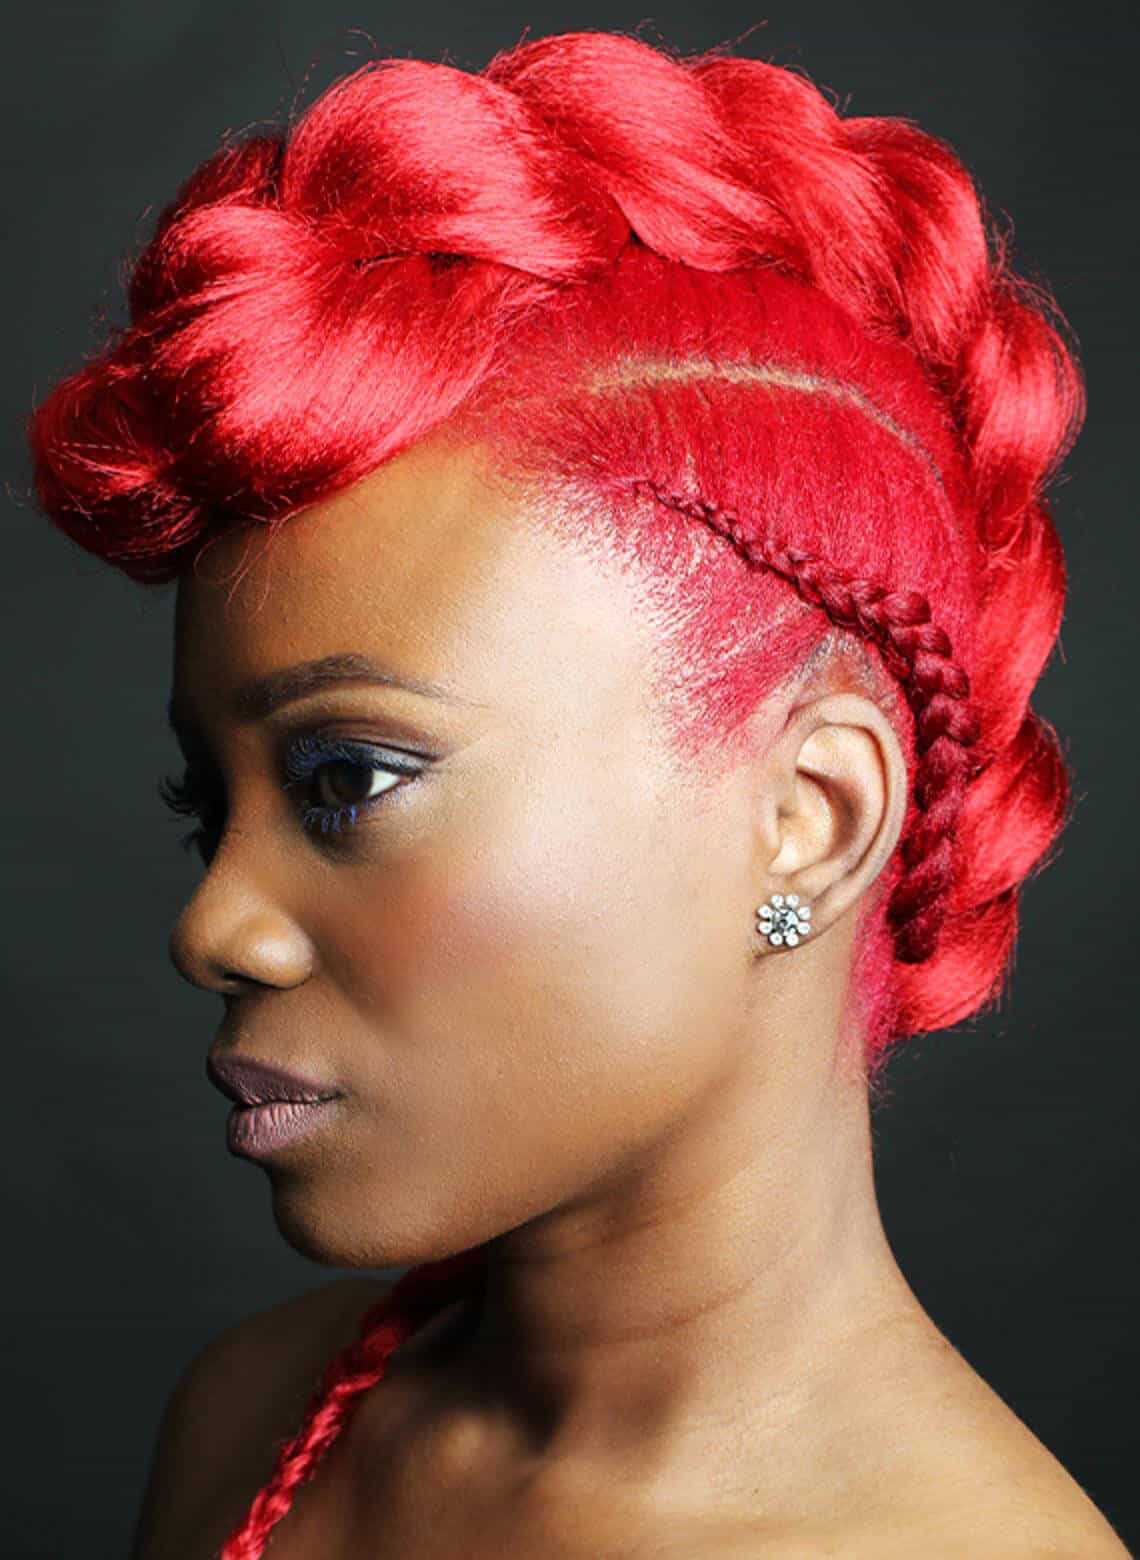 profile of person with bright red braided faux hawk and wearing flower-shaped stud earrings